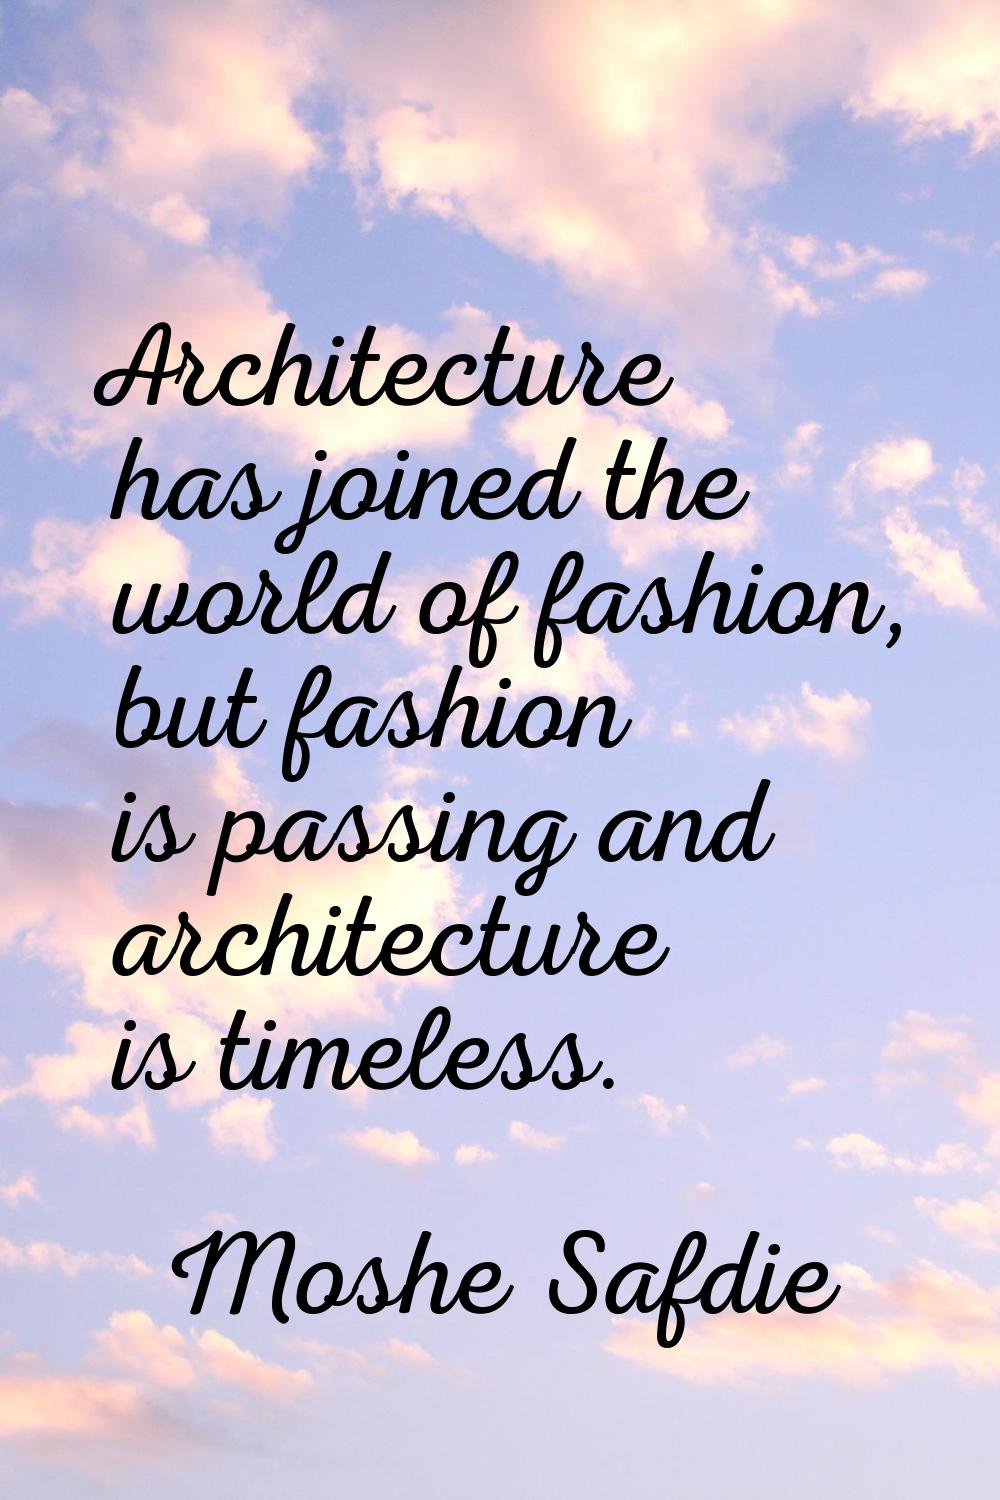 Architecture has joined the world of fashion, but fashion is passing and architecture is timeless.